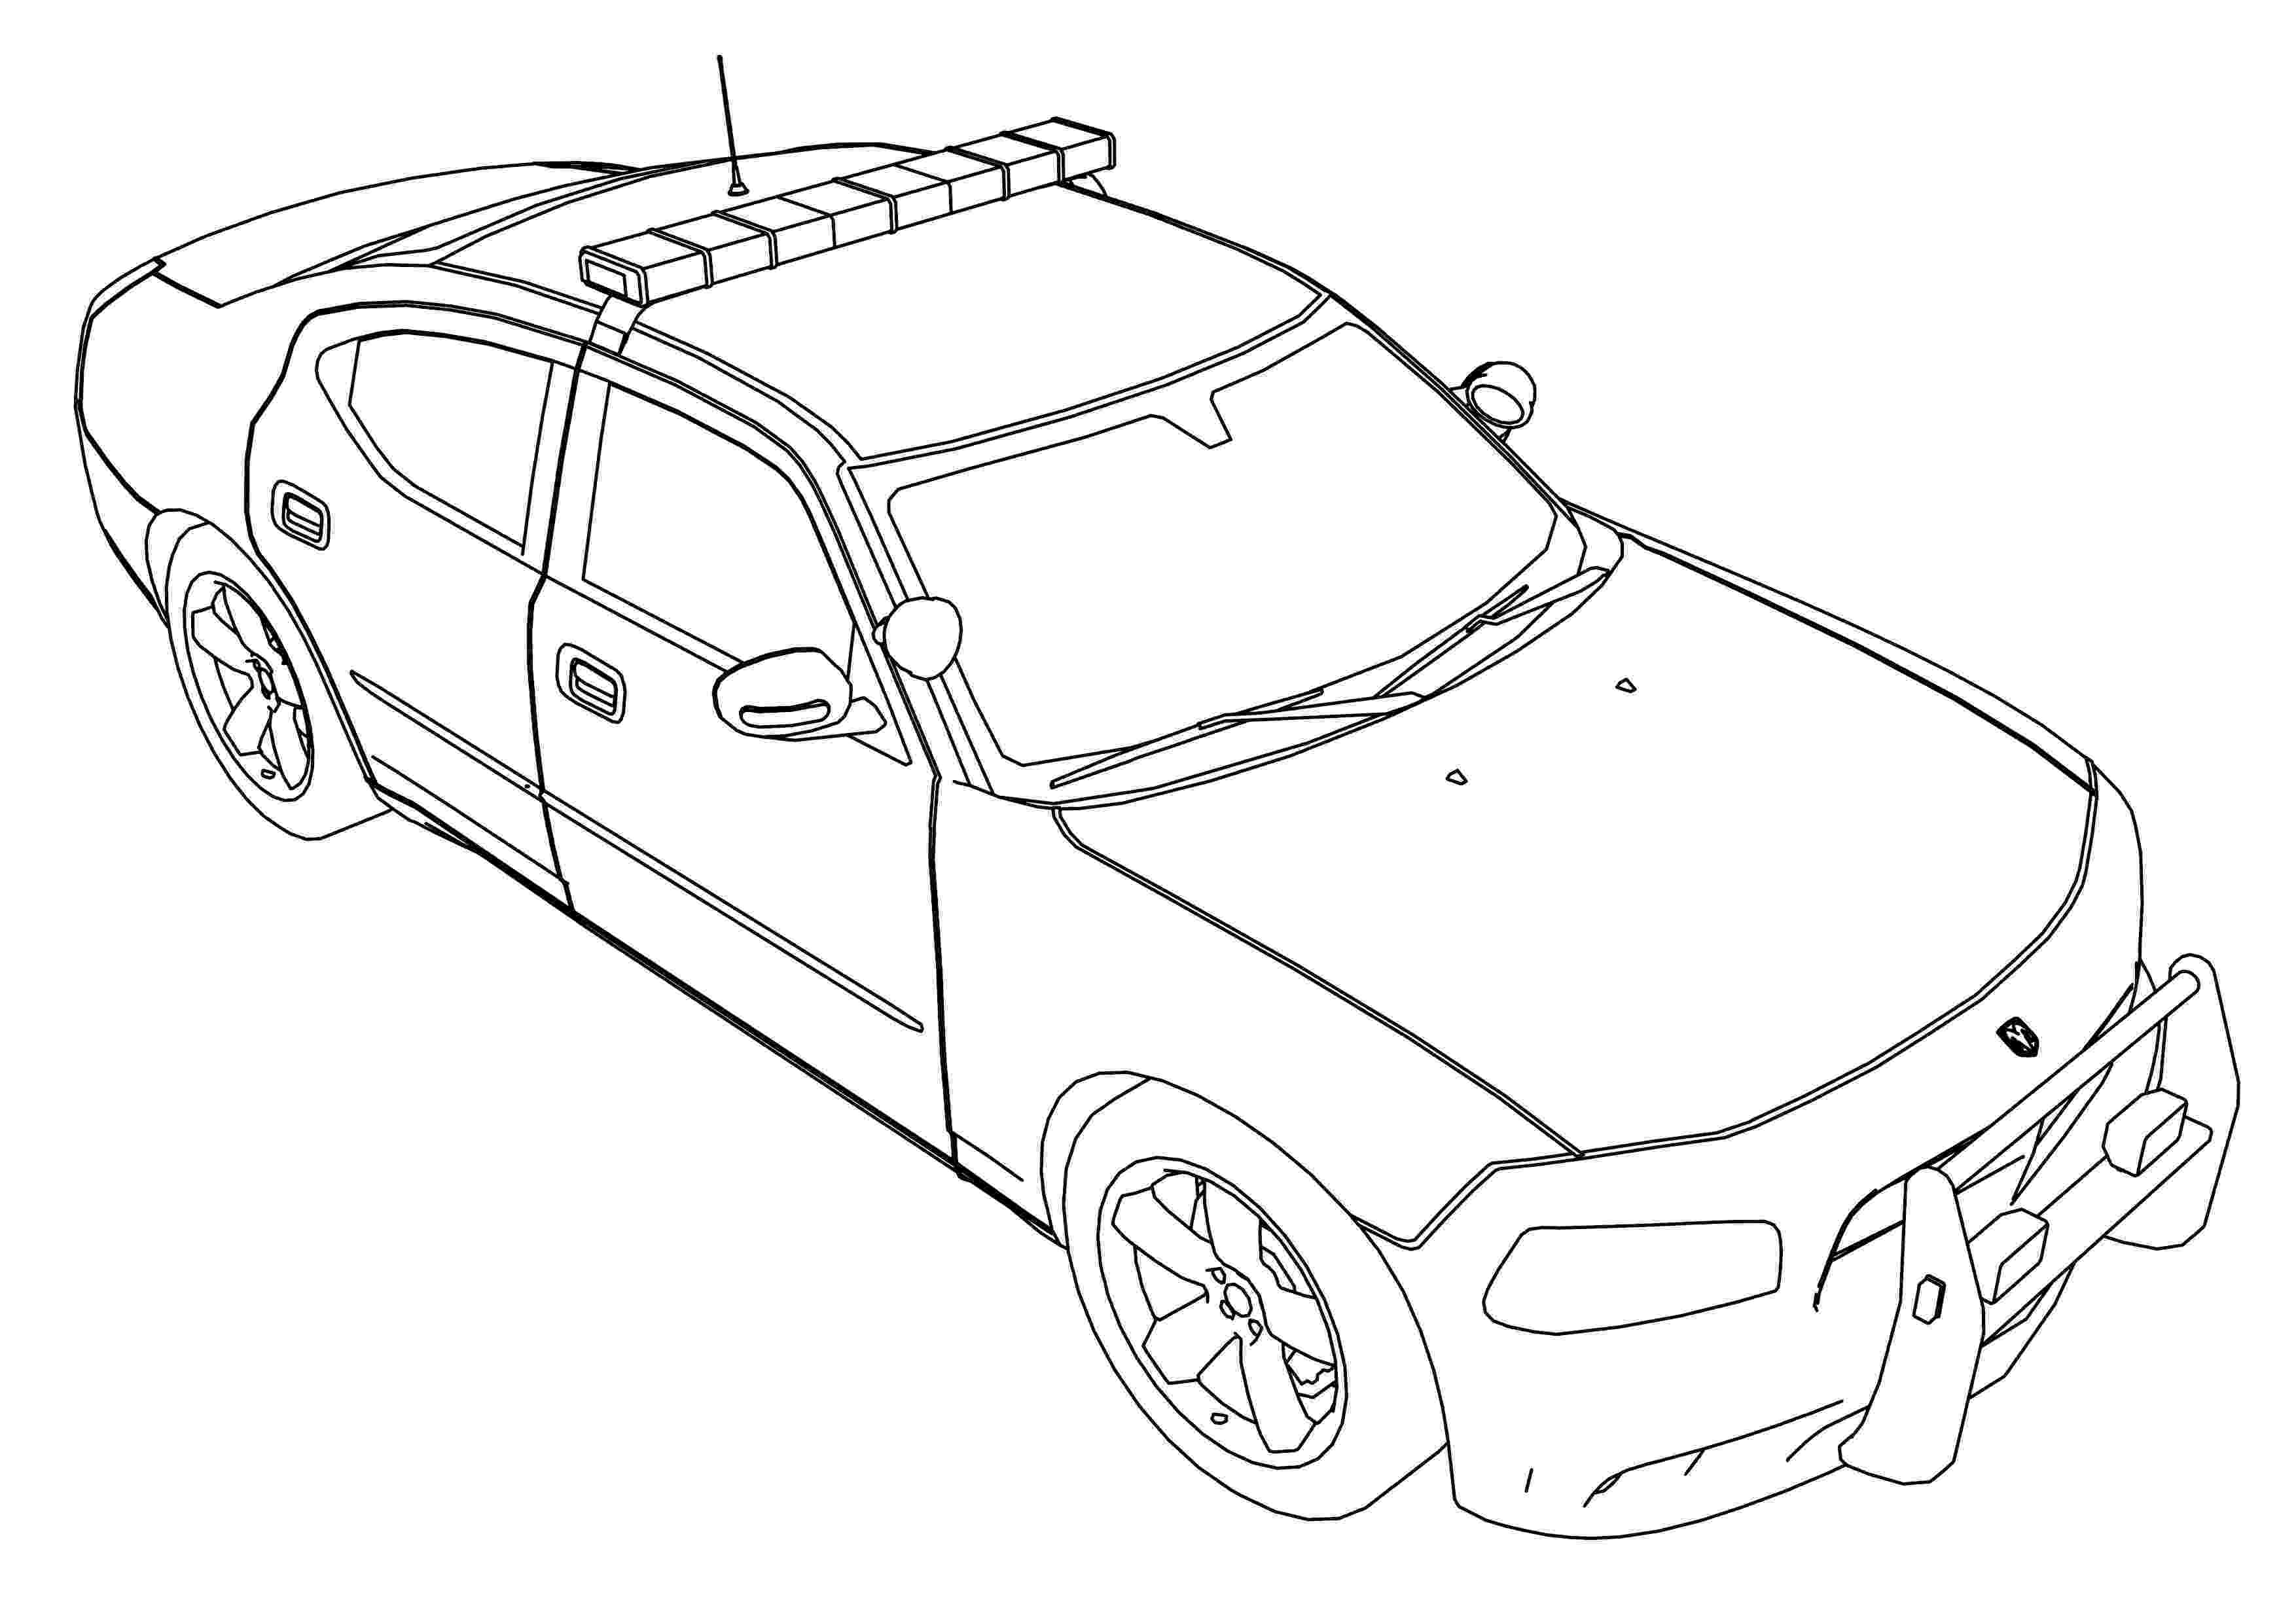 car coloring pages to print police car coloring pages to download and print for free car print to coloring pages 